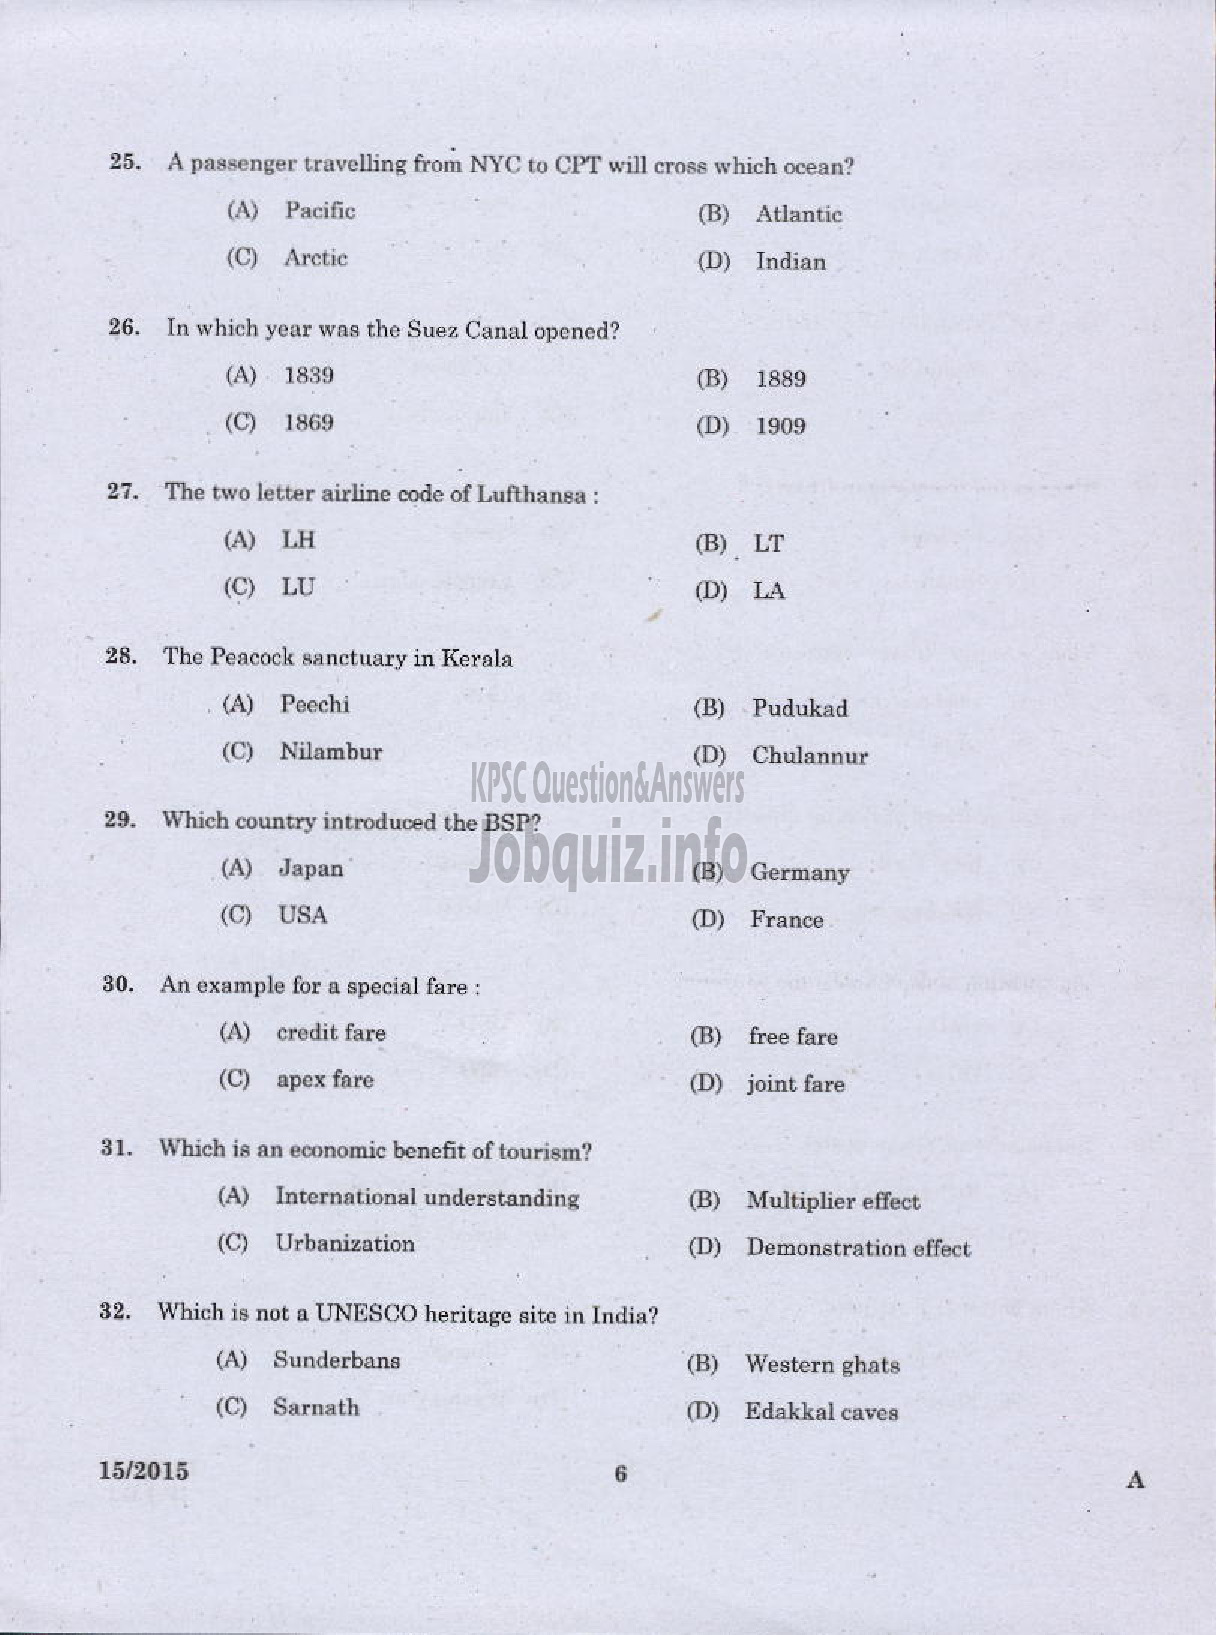 Kerala PSC Question Paper - LABORATORY TECHNICAL ASSISTANT TRAVEL AND TOURISM VHSE-4